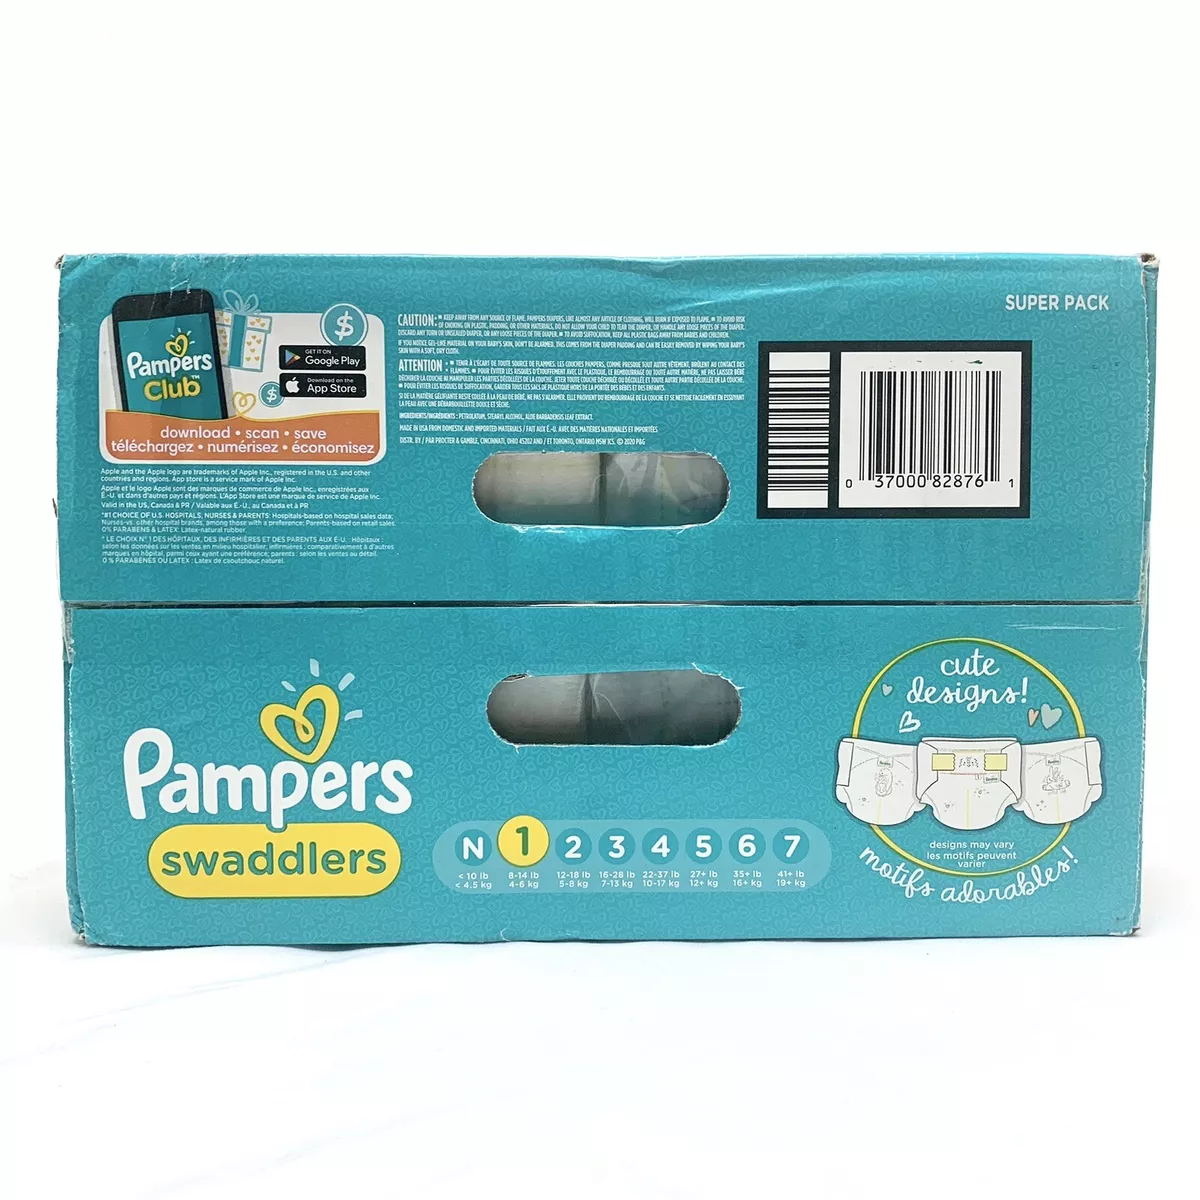 pampers pants active boy